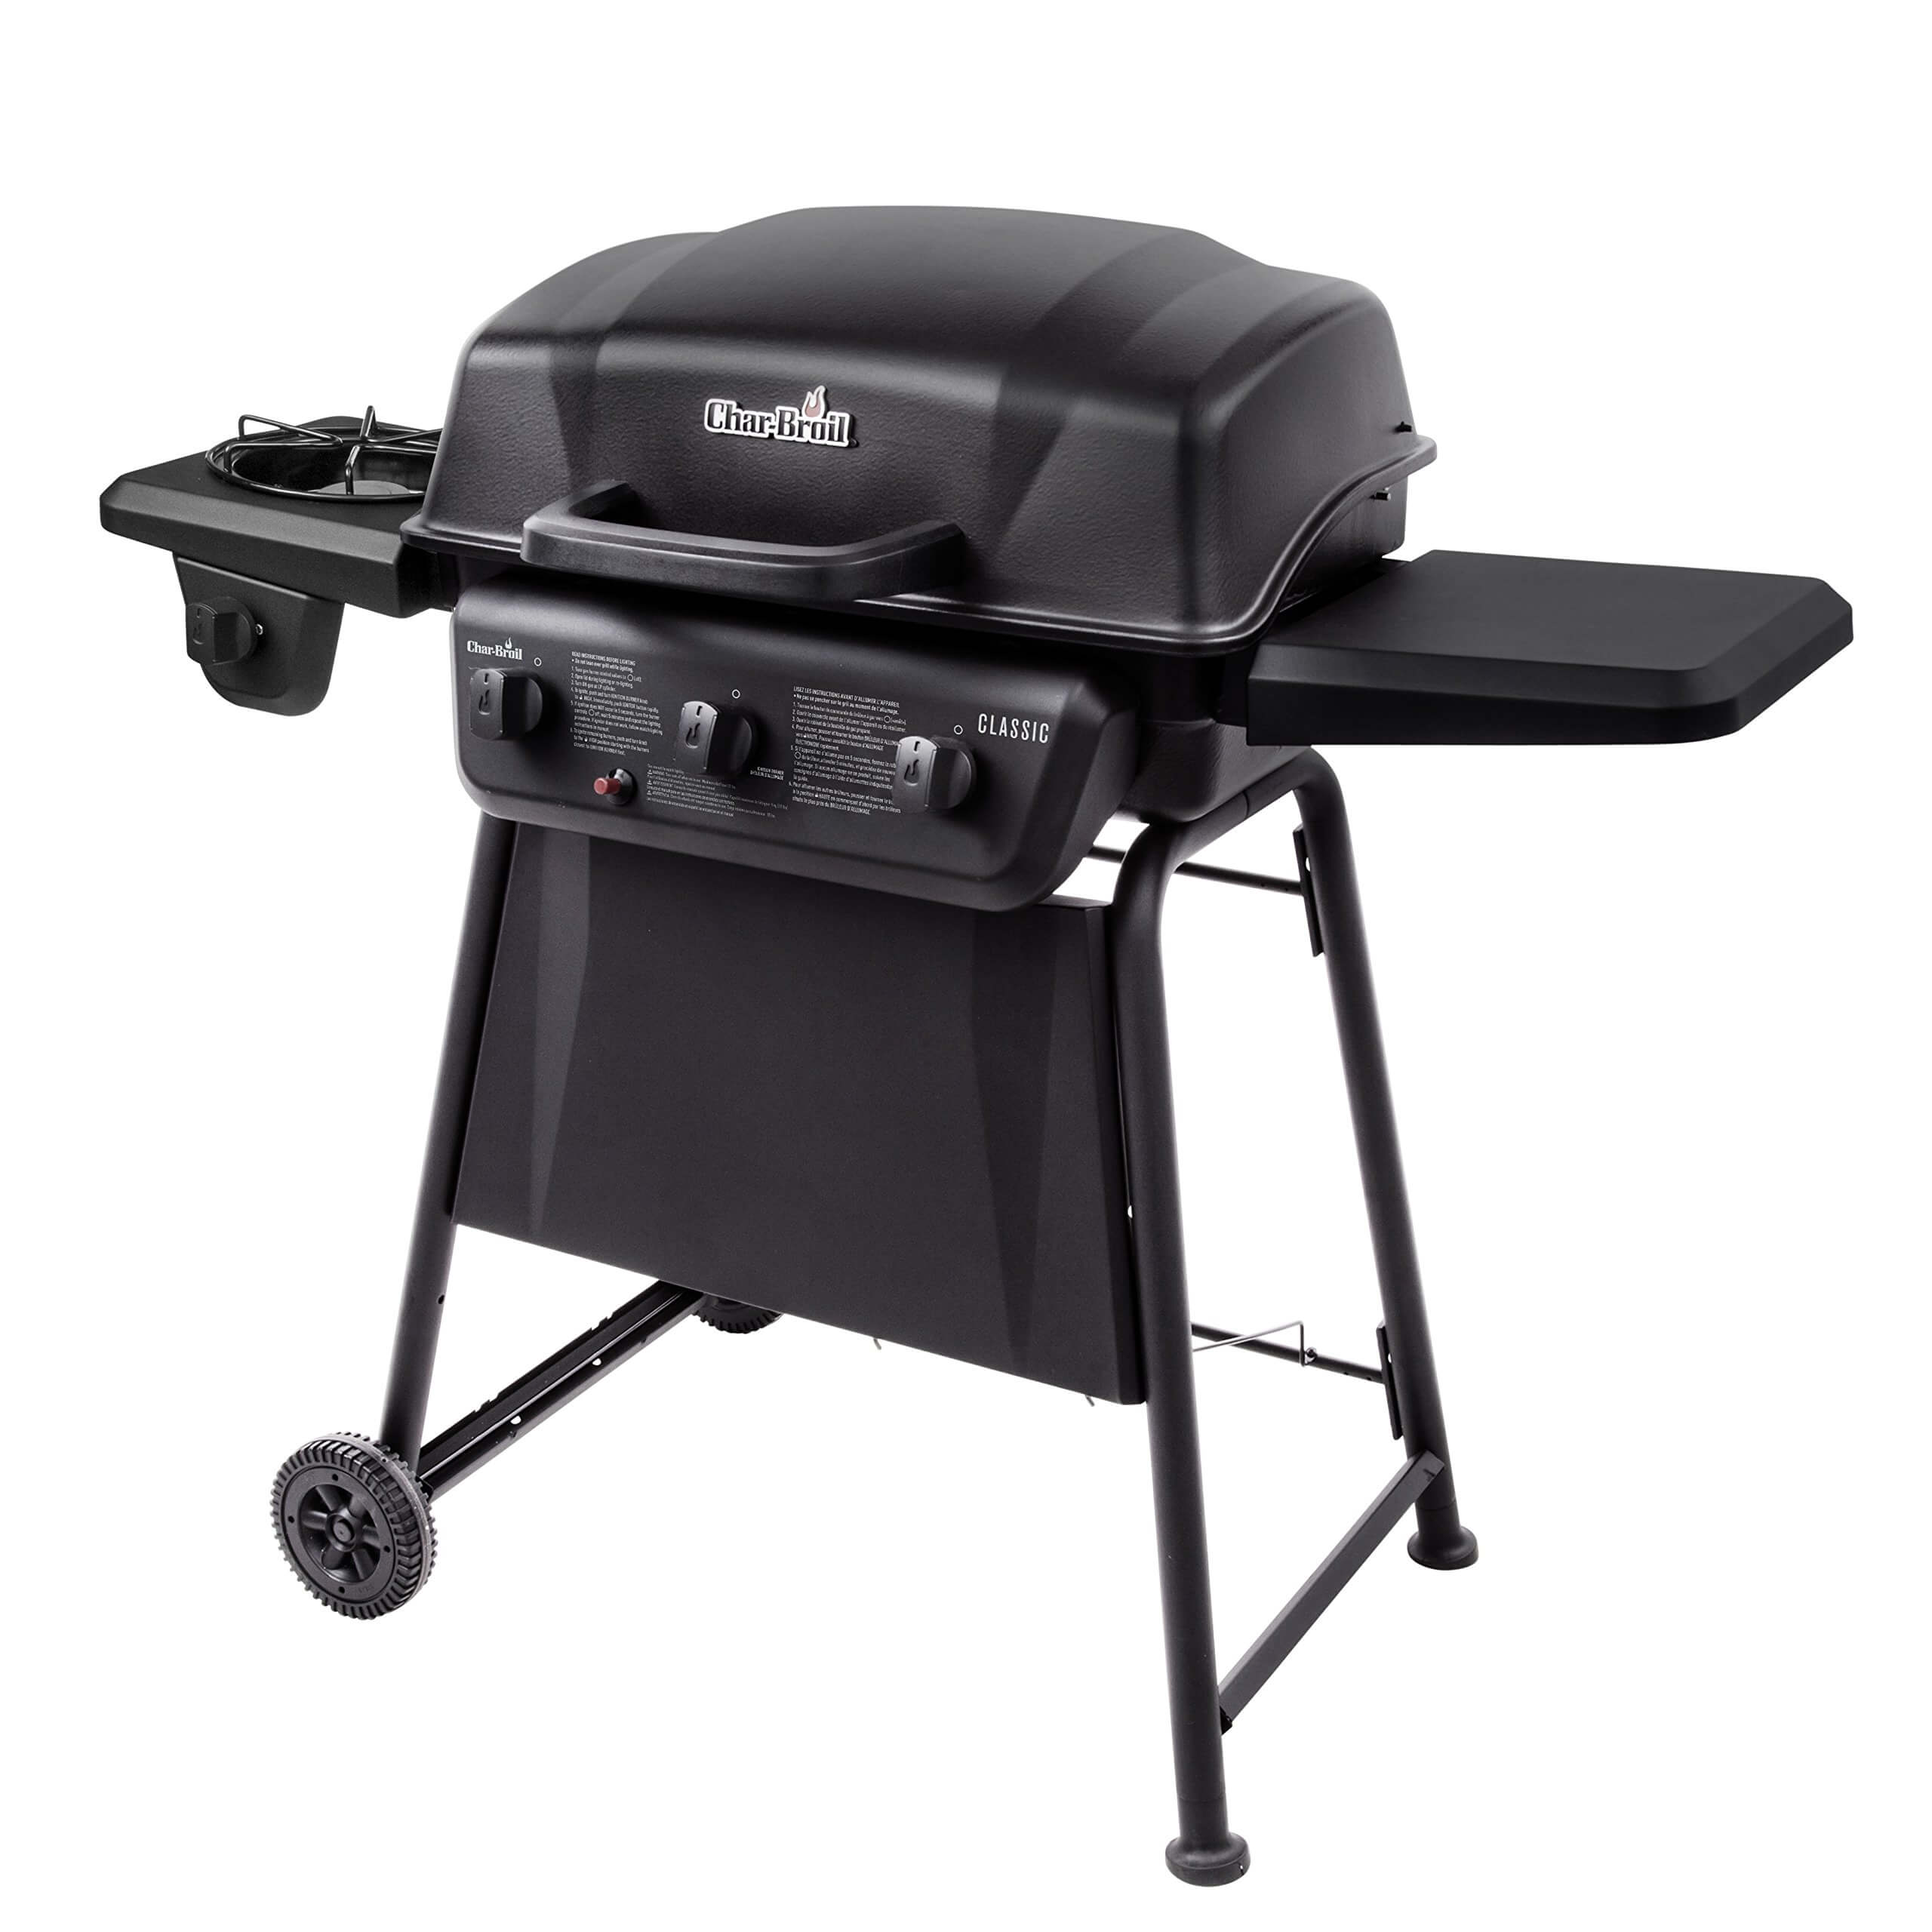 Best Gas Grill under $300 for Delicious and Easy Home Grilling. char-broil performance 475, char-broil performance 475 gas grill, best charcoal grill under 300, best charcoal grills under 300, best propane smoker under 300, best propane gas grills under $300